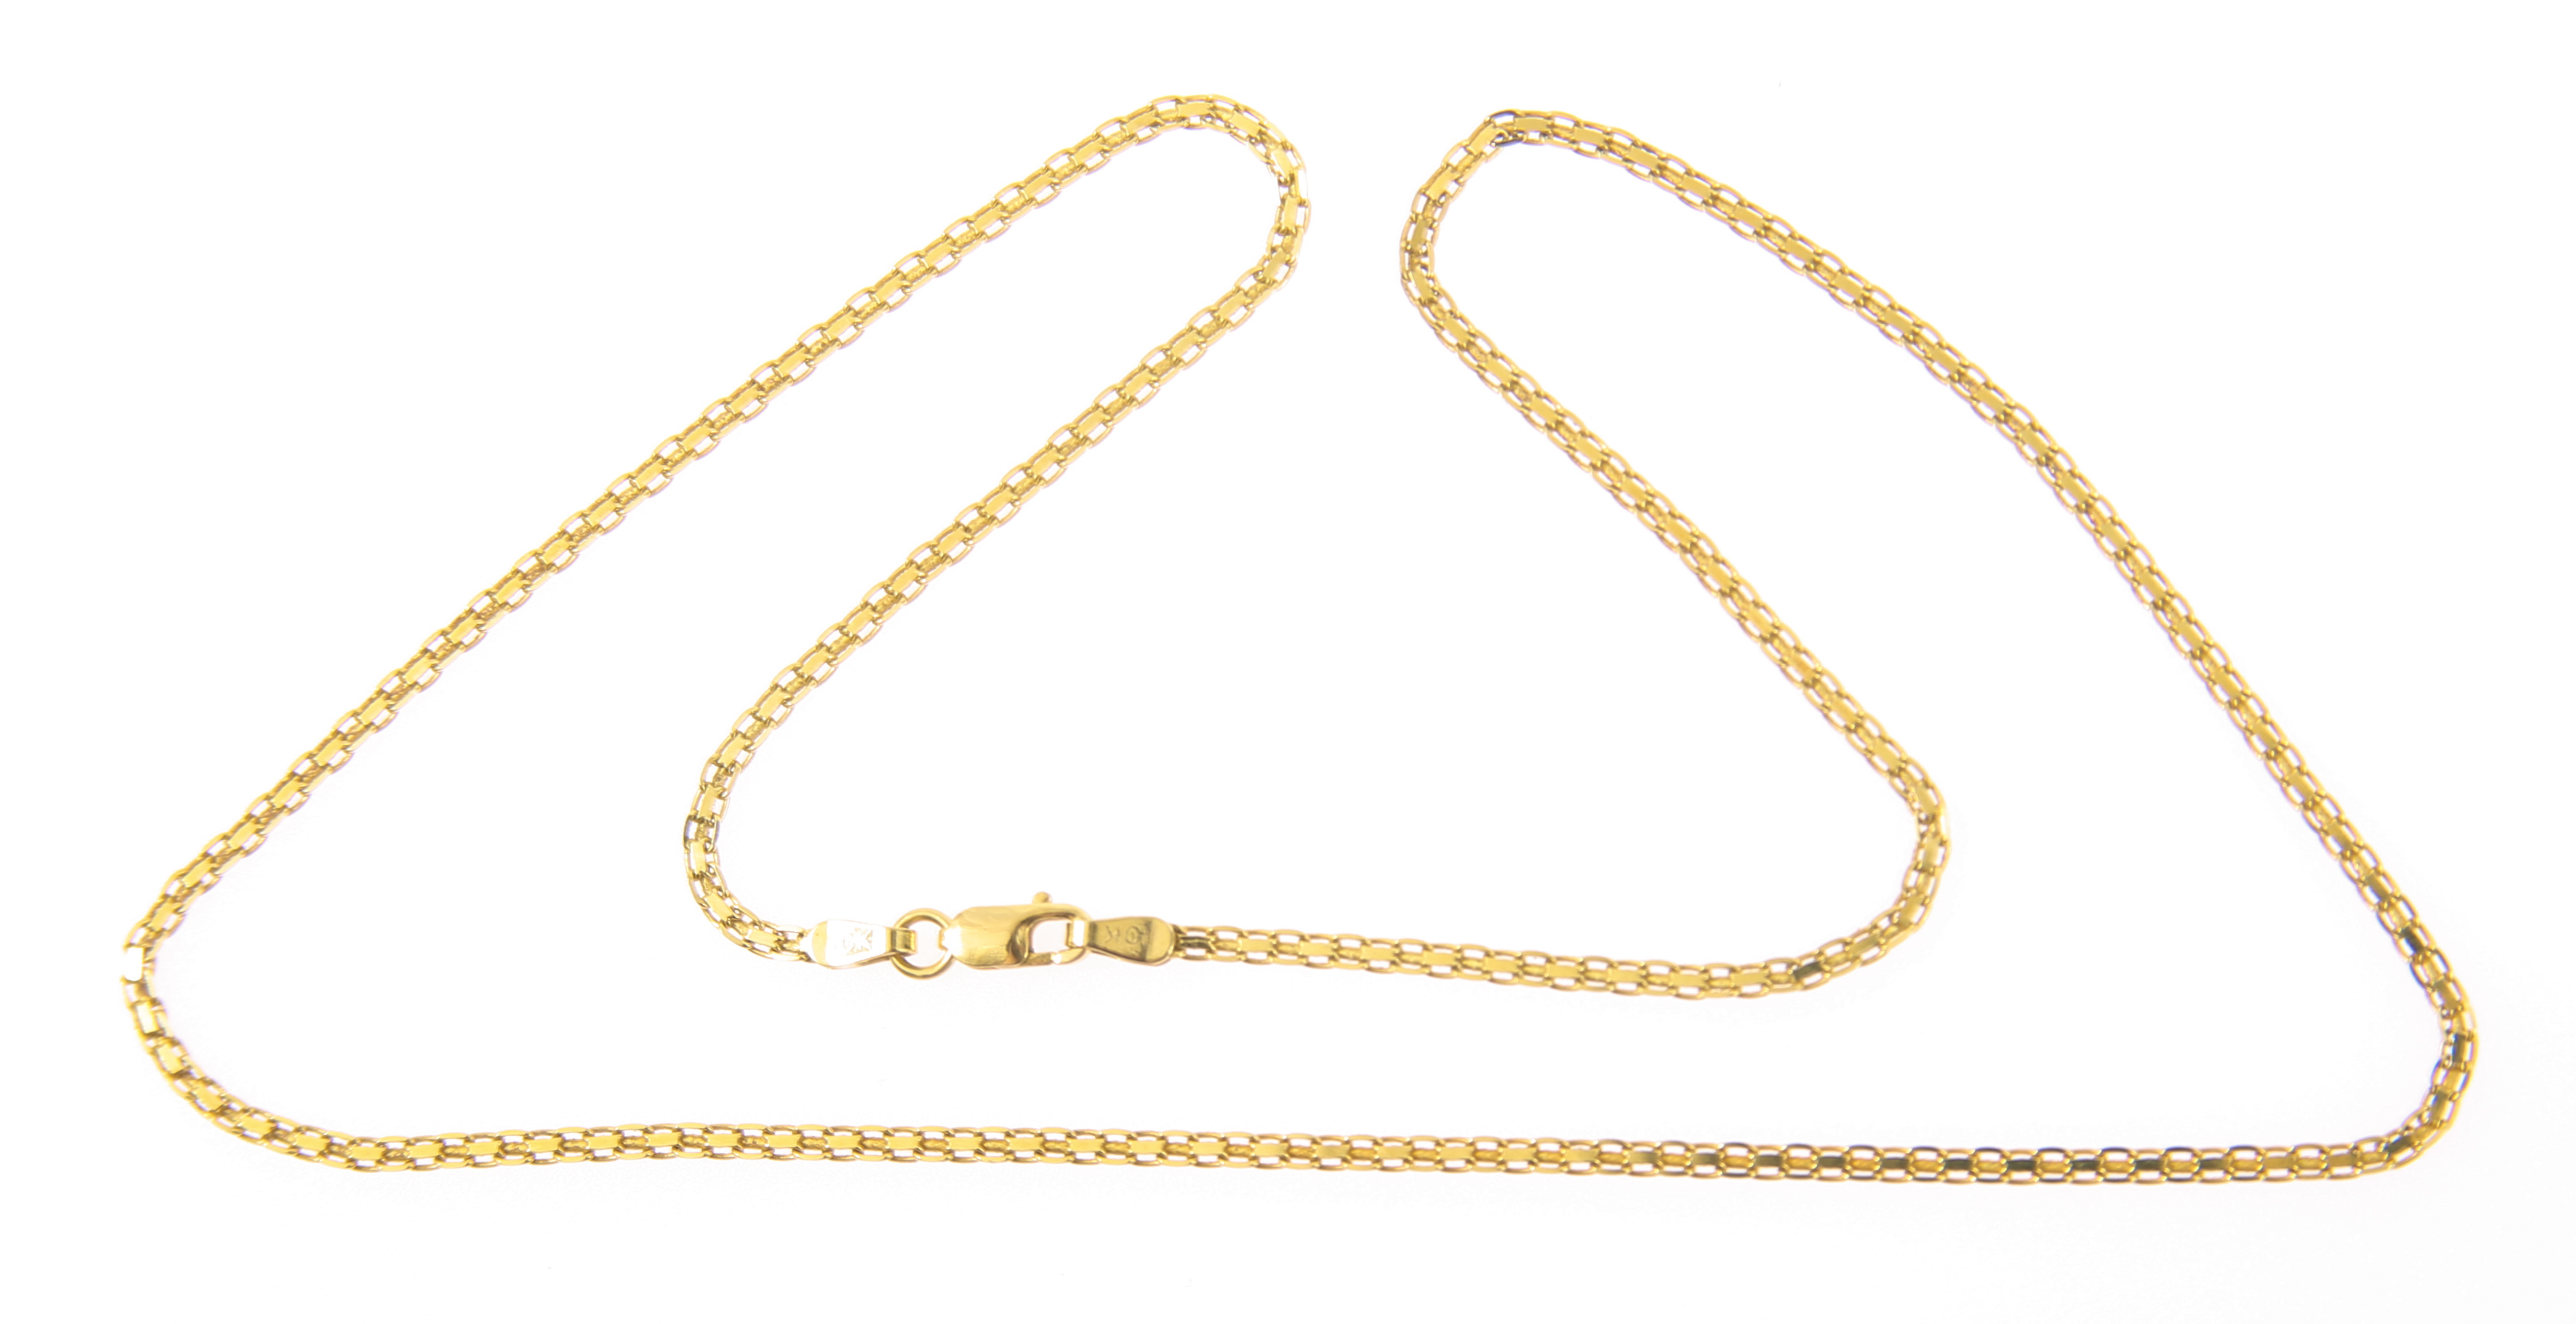 Lot Detail - 10K YELLOW GOLD DOUBLE CABLE LINK CHAIN - 18"